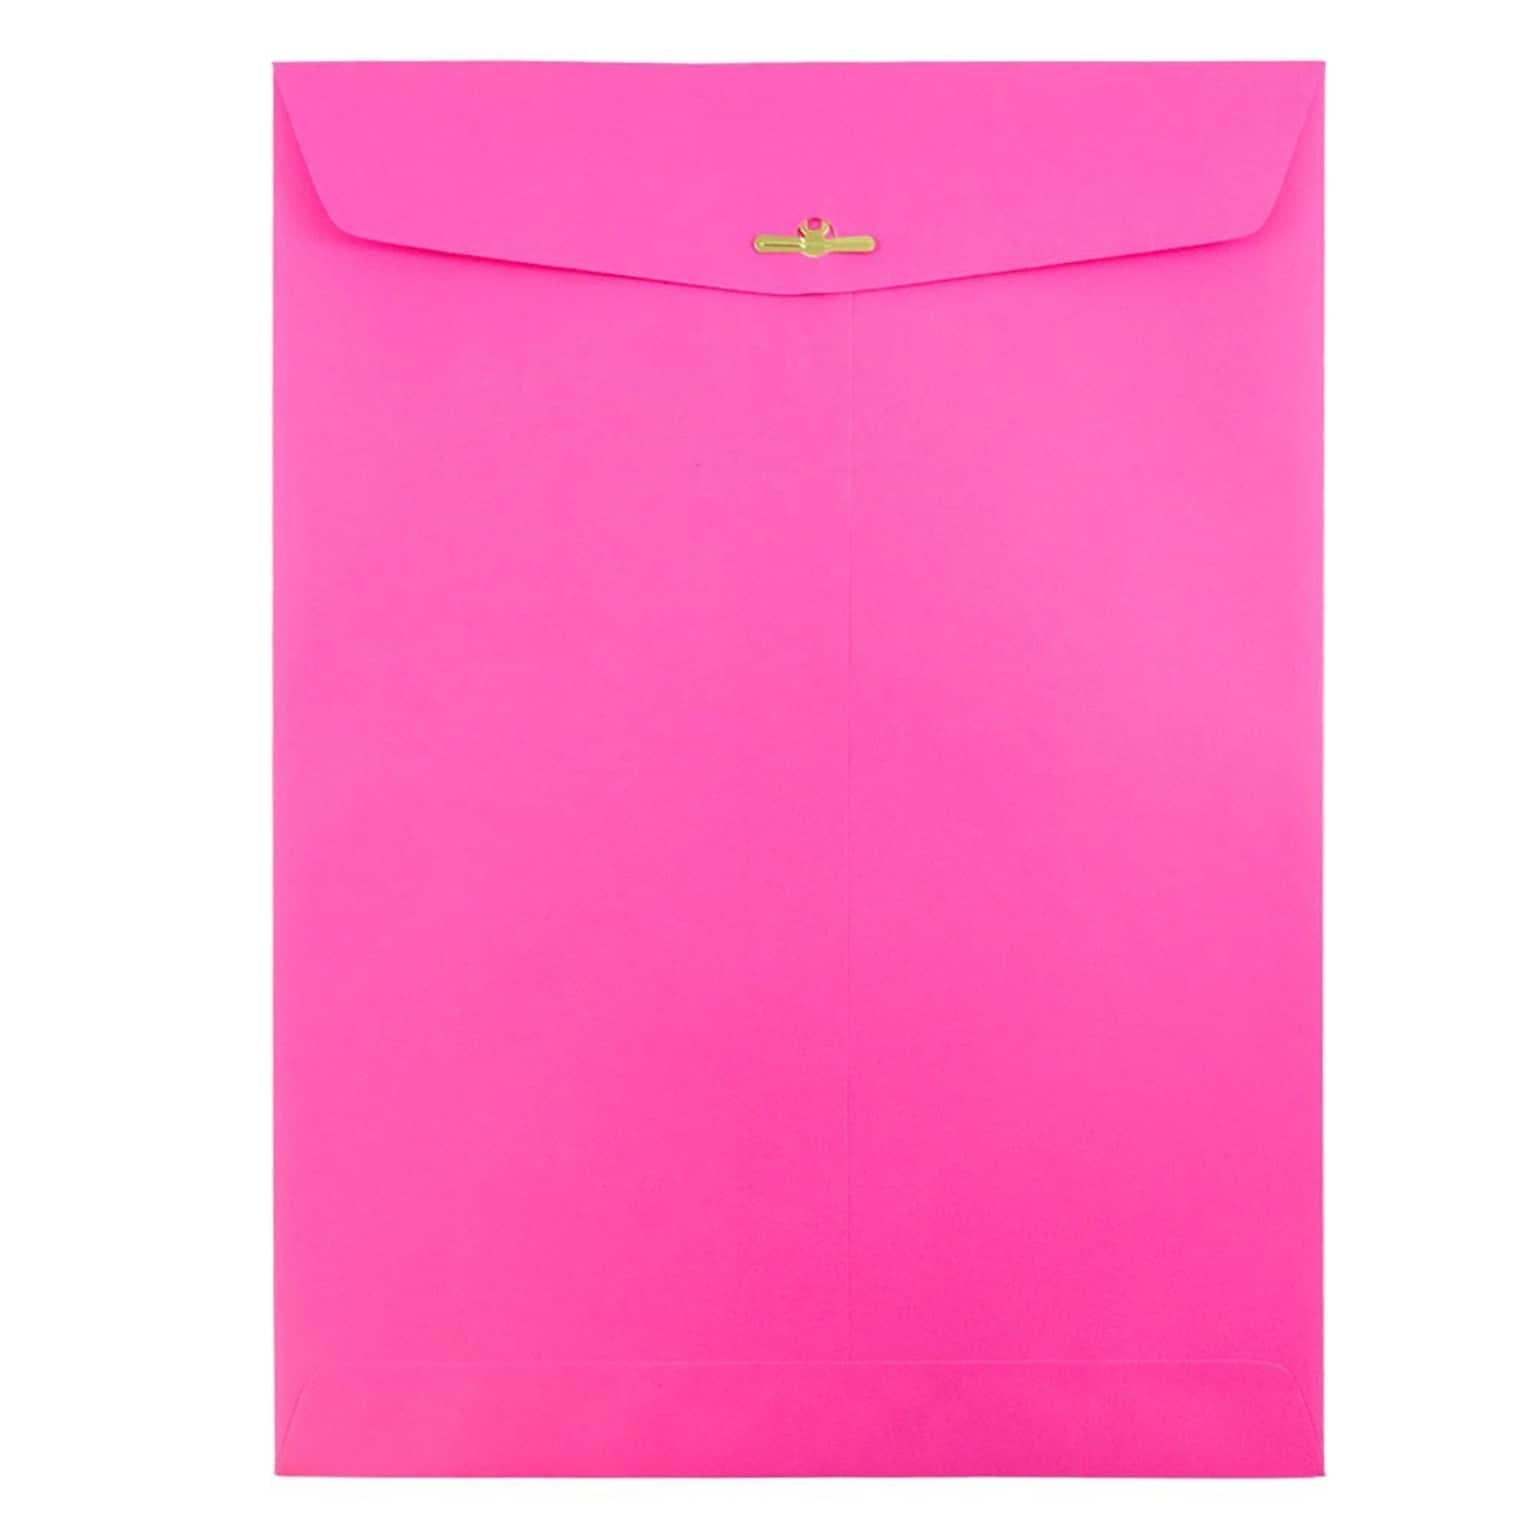 JAM Paper 9 x 12 Open End Catalog Colored Envelopes with Clasp Closure, Ultra Fuchsia Pink, 10/Pack (90909027B)